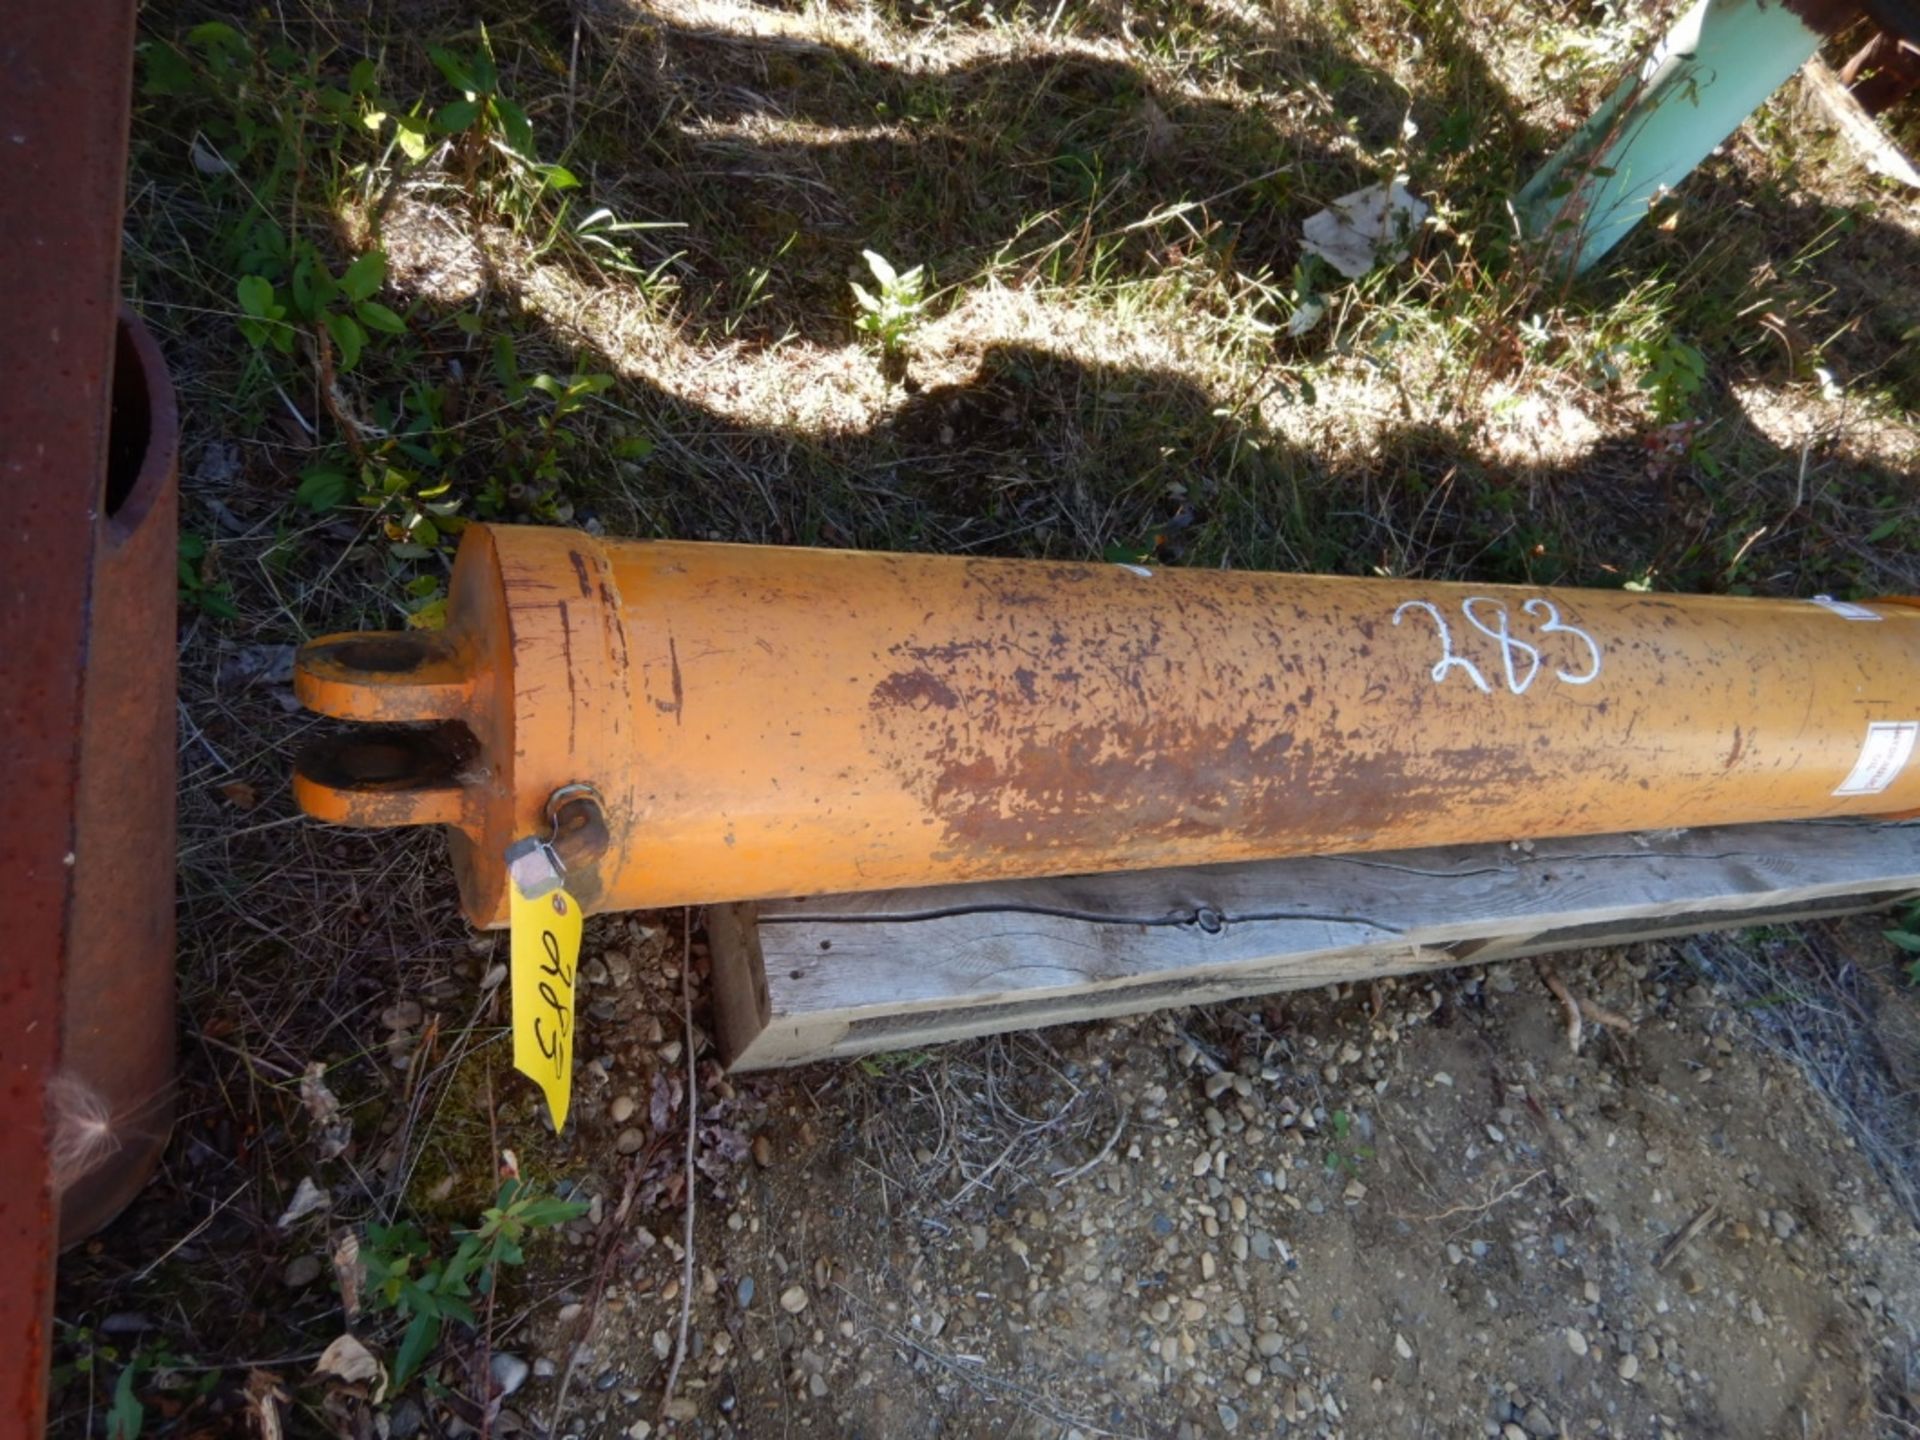 COMMERCIAL RAM 4 1/2" X 60" 3 STAGE HYDRAULIC RAM SD93DC-1-177 - Image 3 of 3